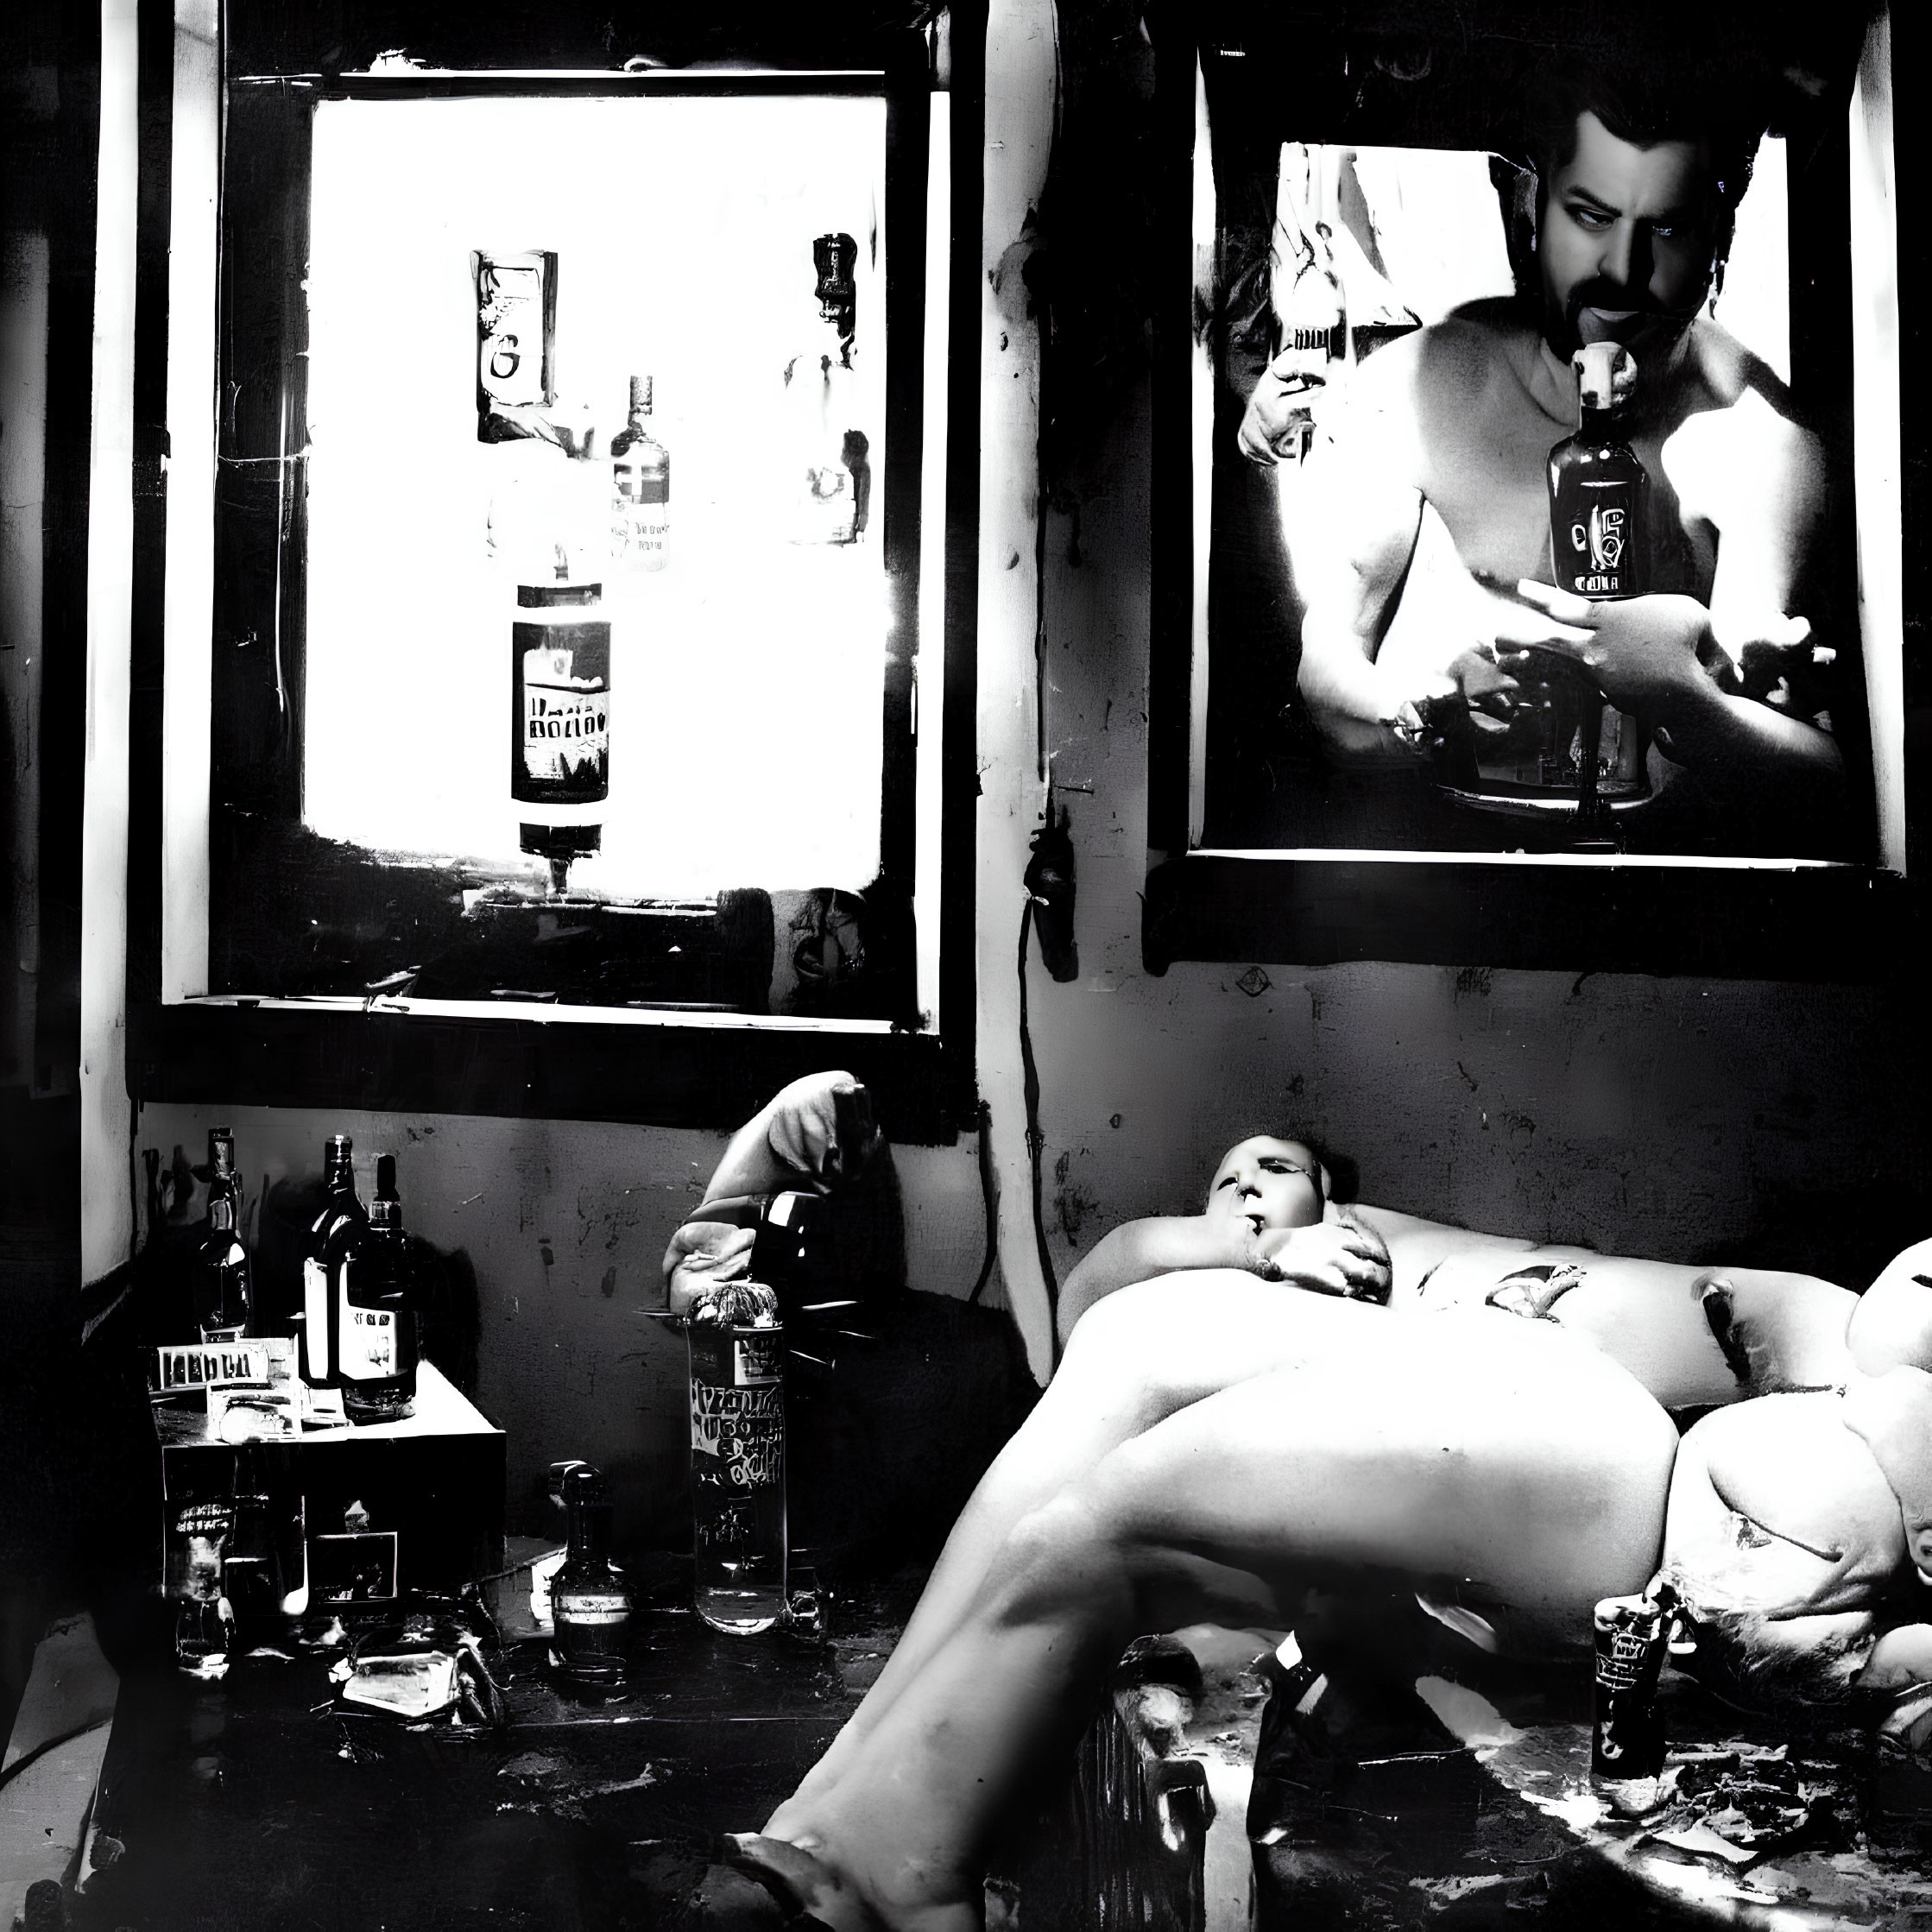 Monochrome image of reclining woman, man at window, and alcohol poster